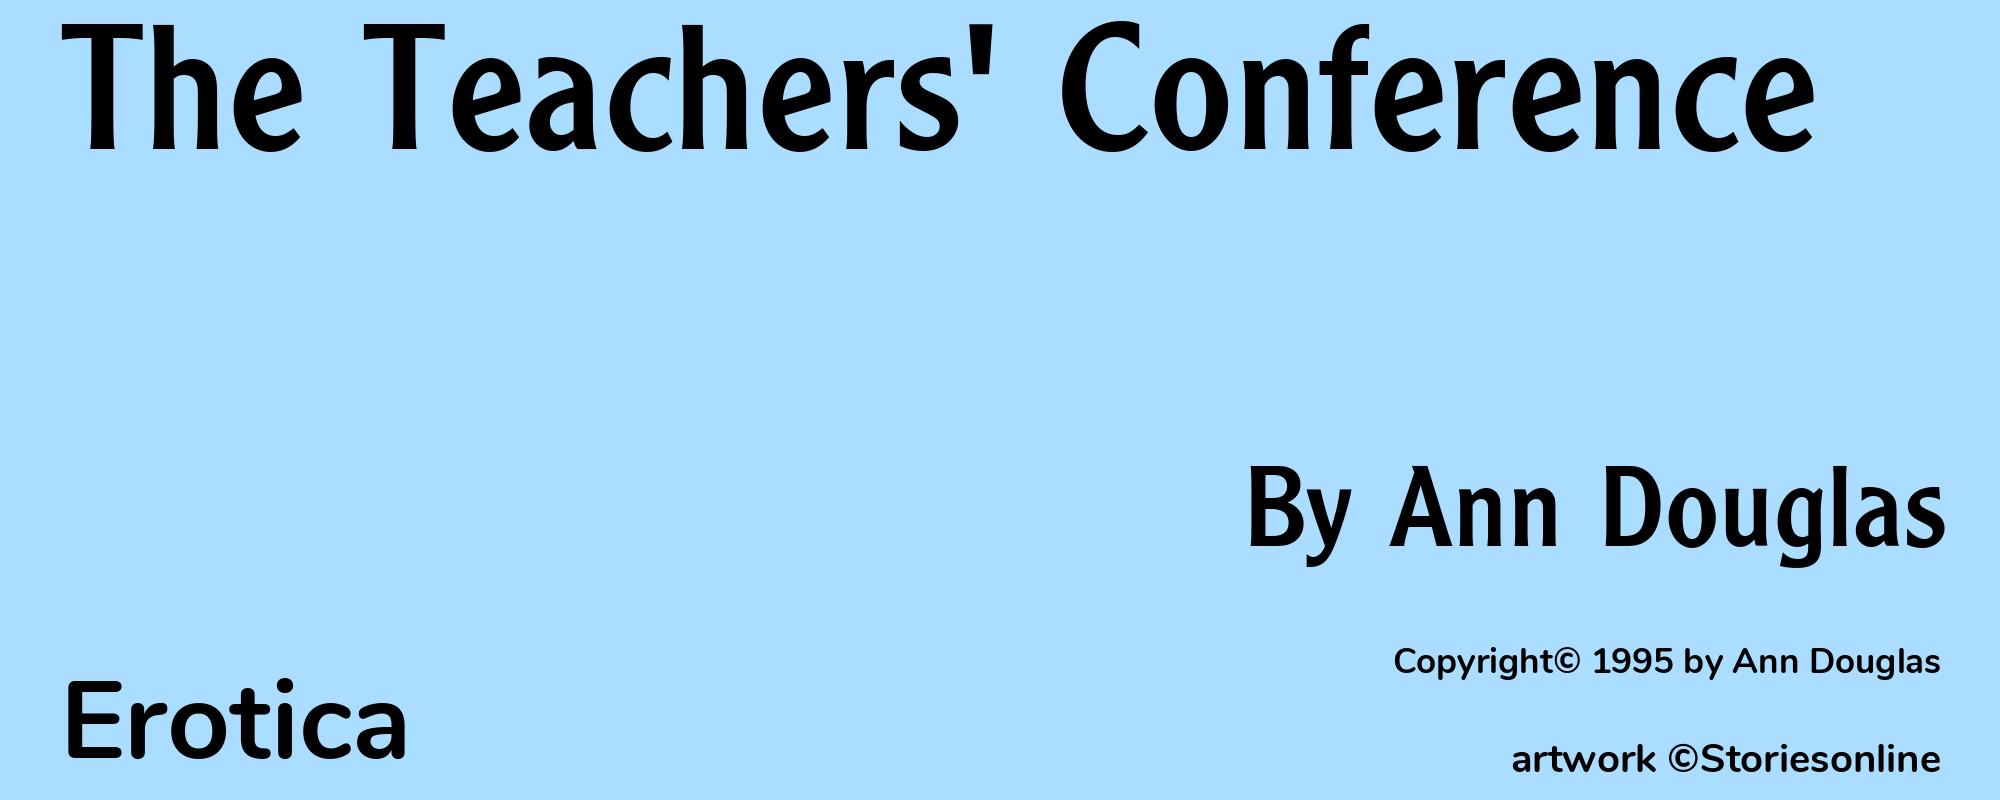 The Teachers' Conference - Cover